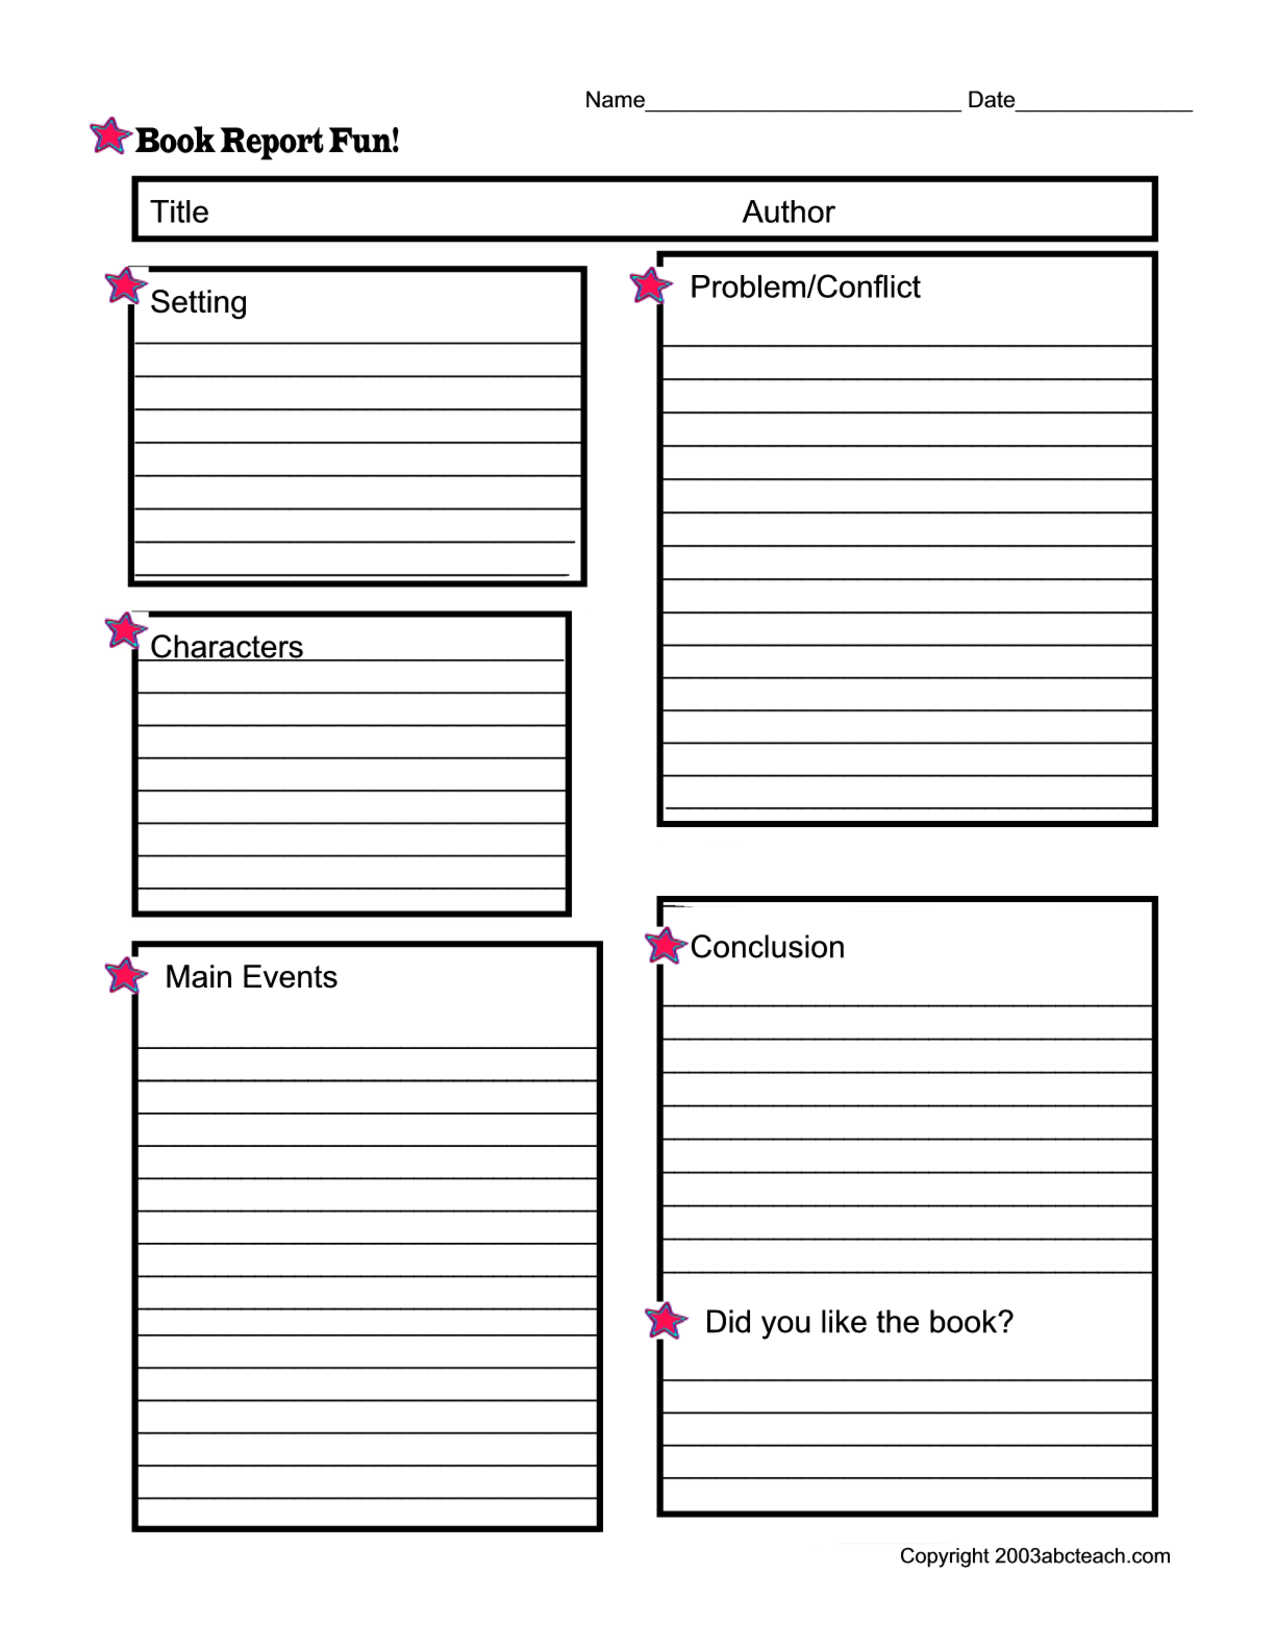 16-best-images-of-fun-book-report-worksheets-reading-book-report